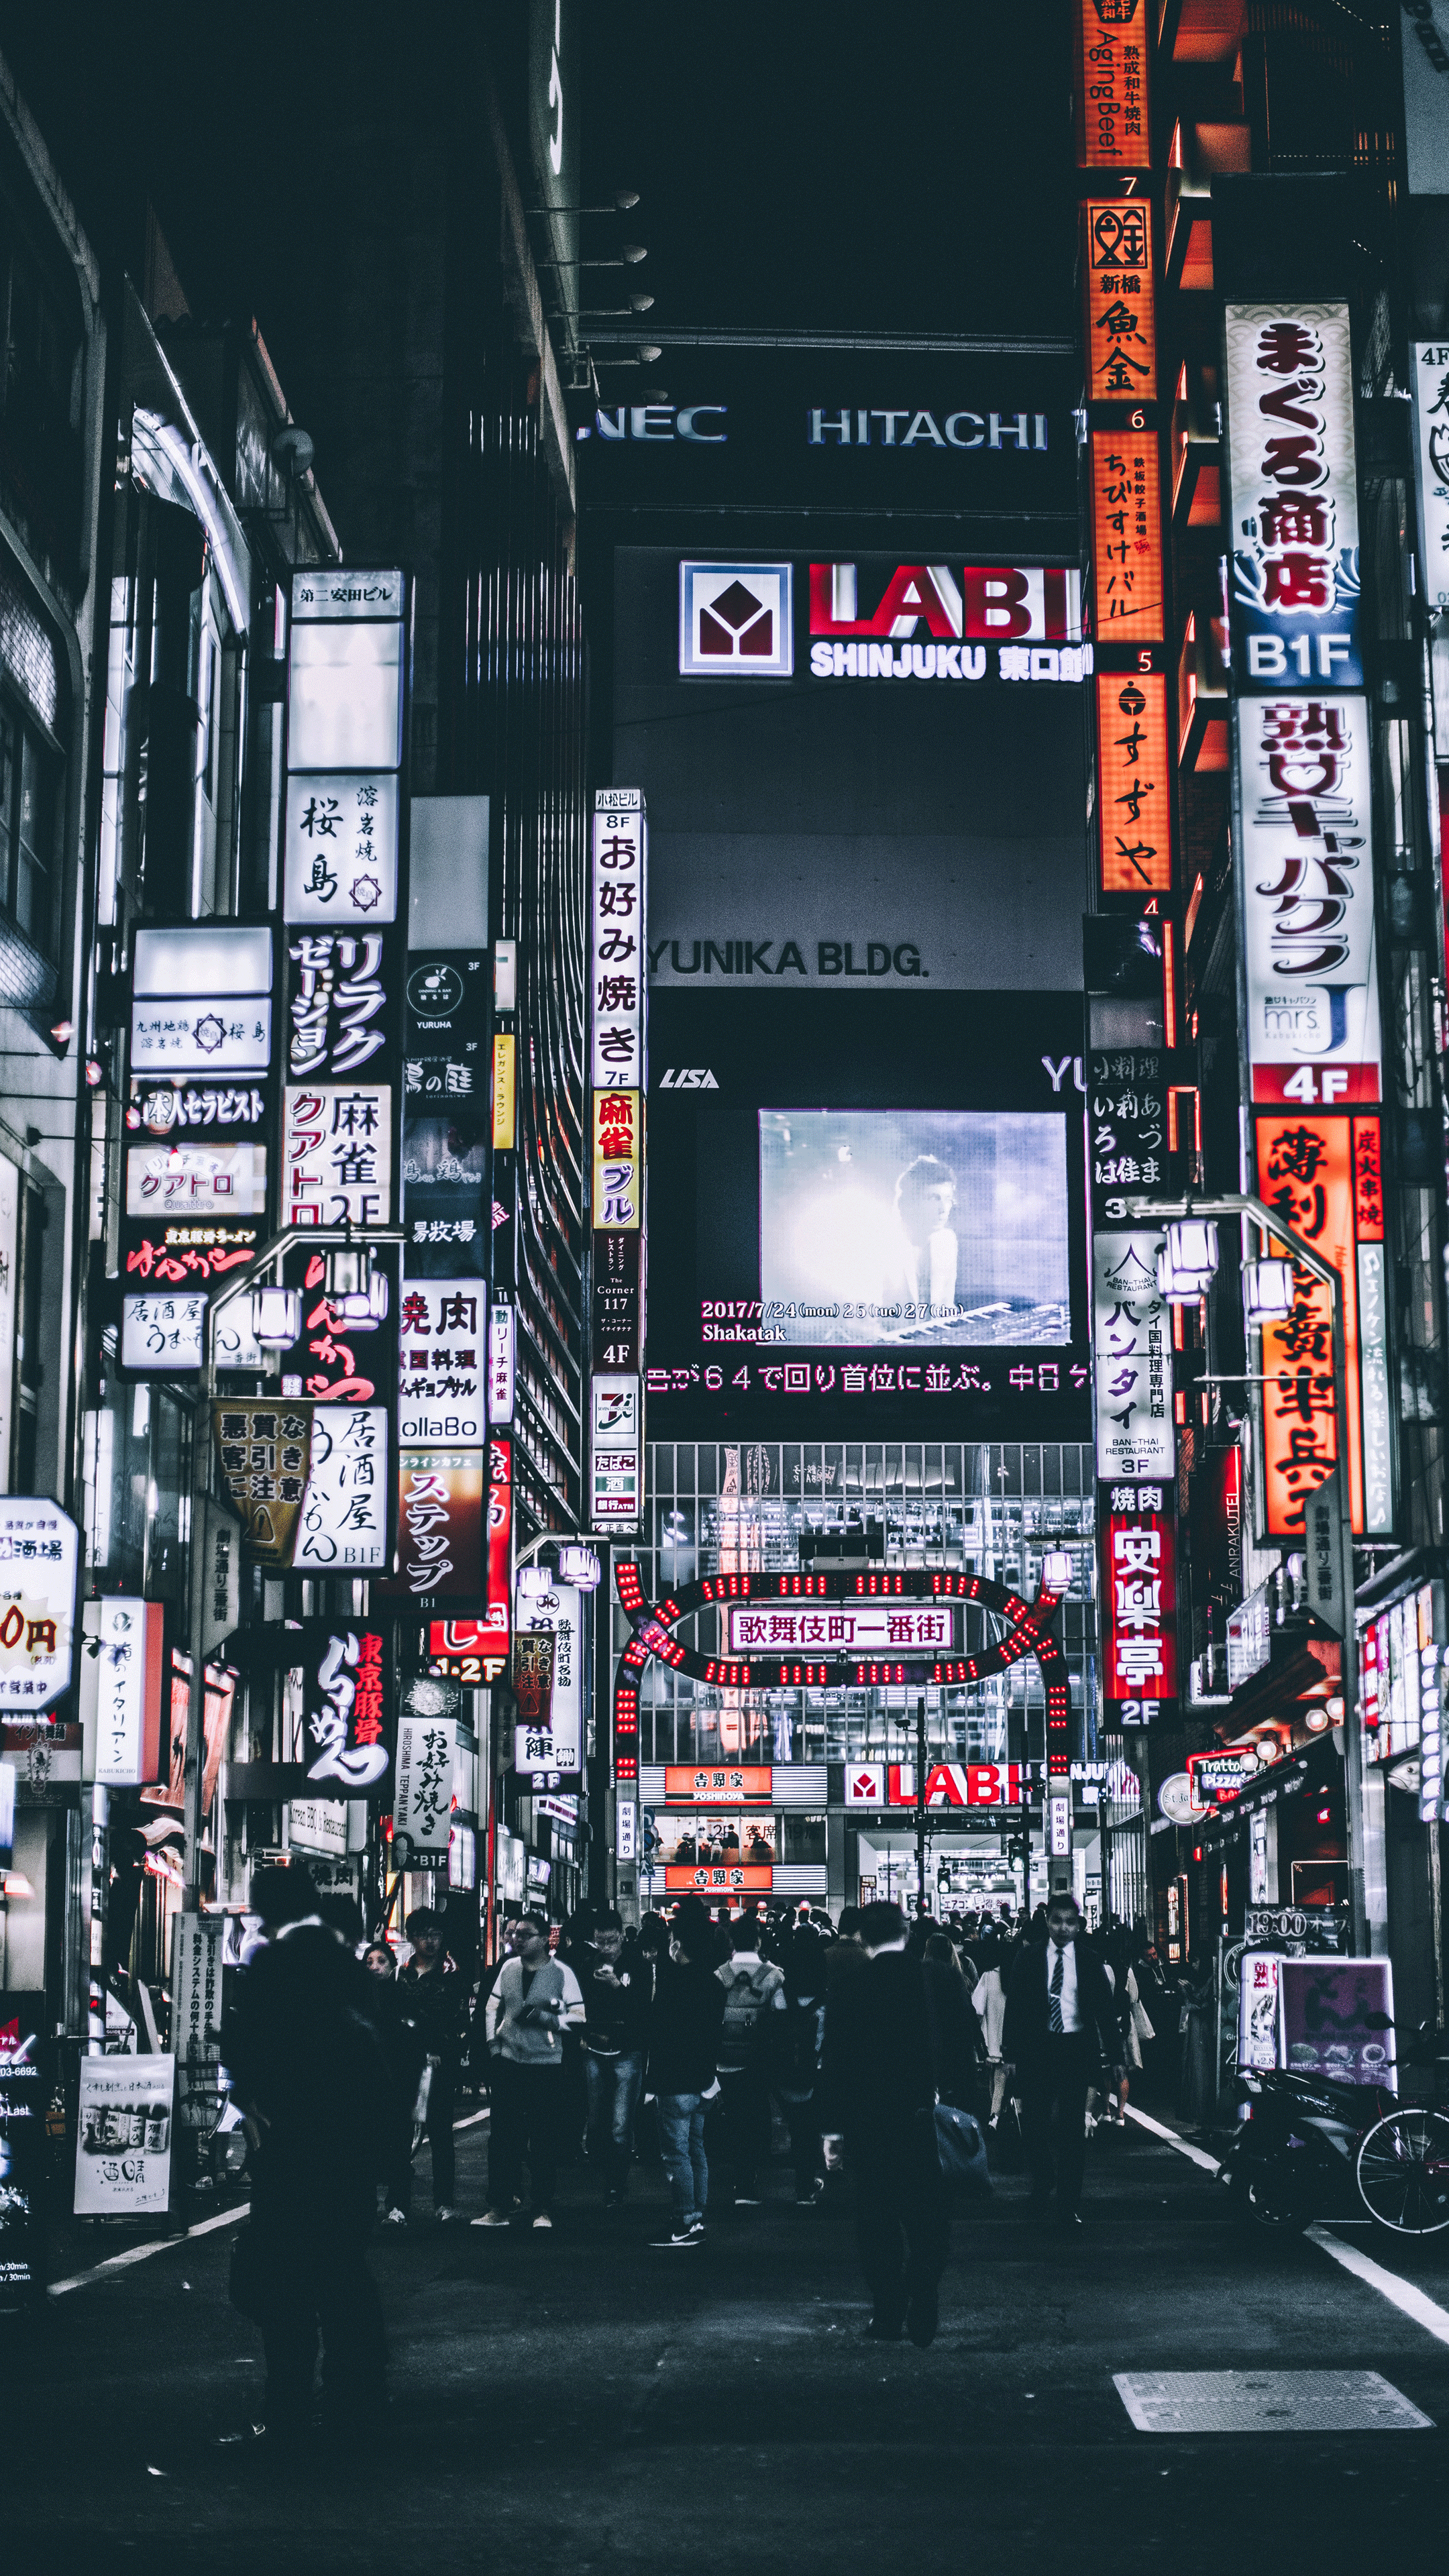 A bright night. City iphone wallpaper, Tokyo picture, City